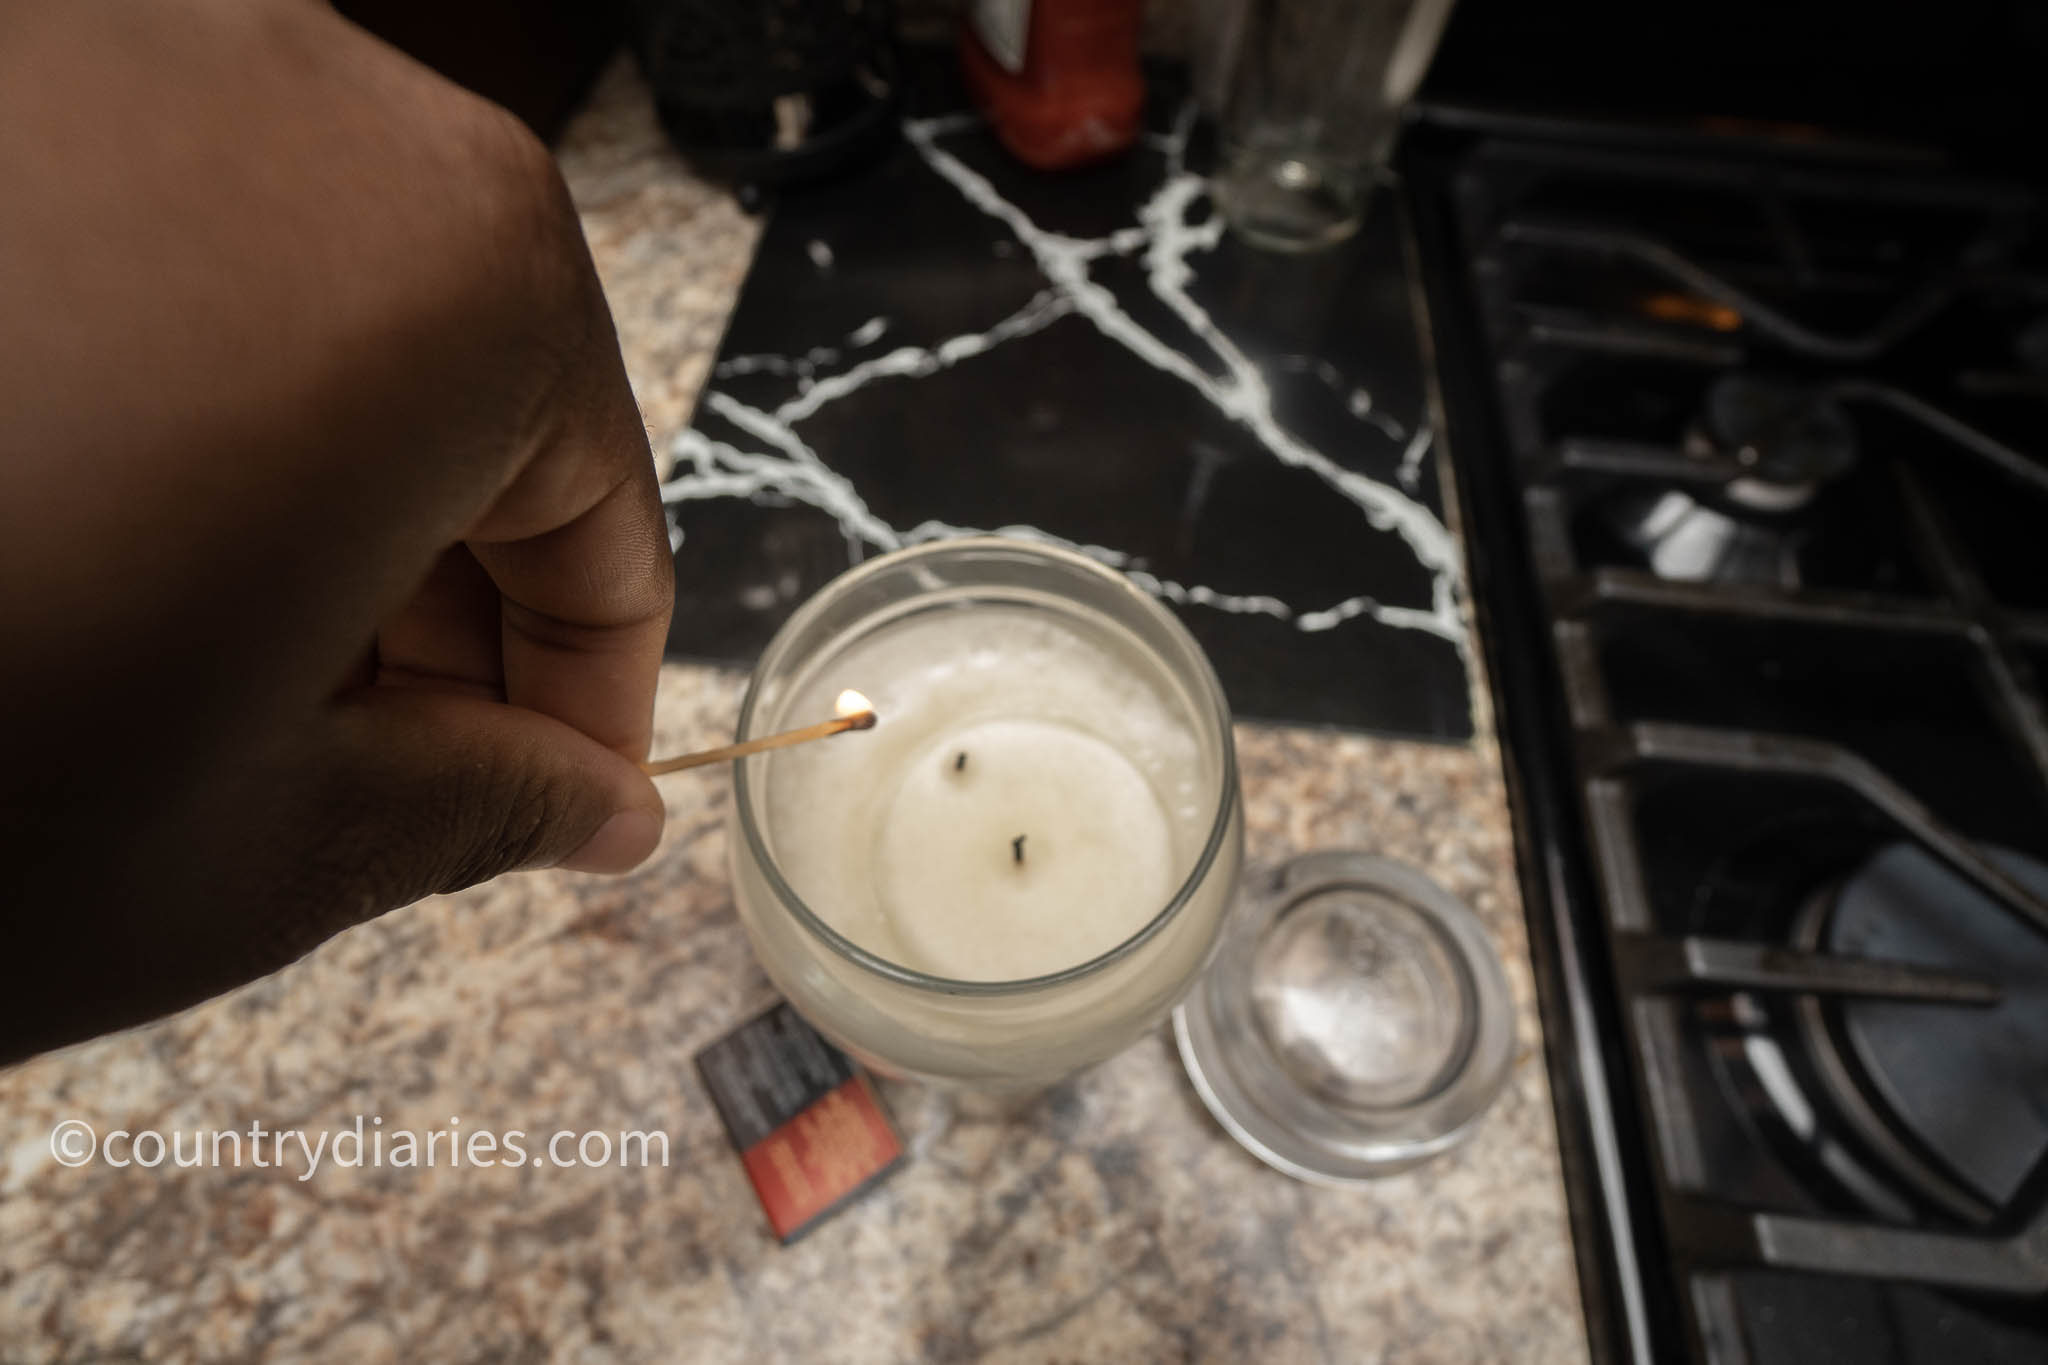 Person lighting candle with match